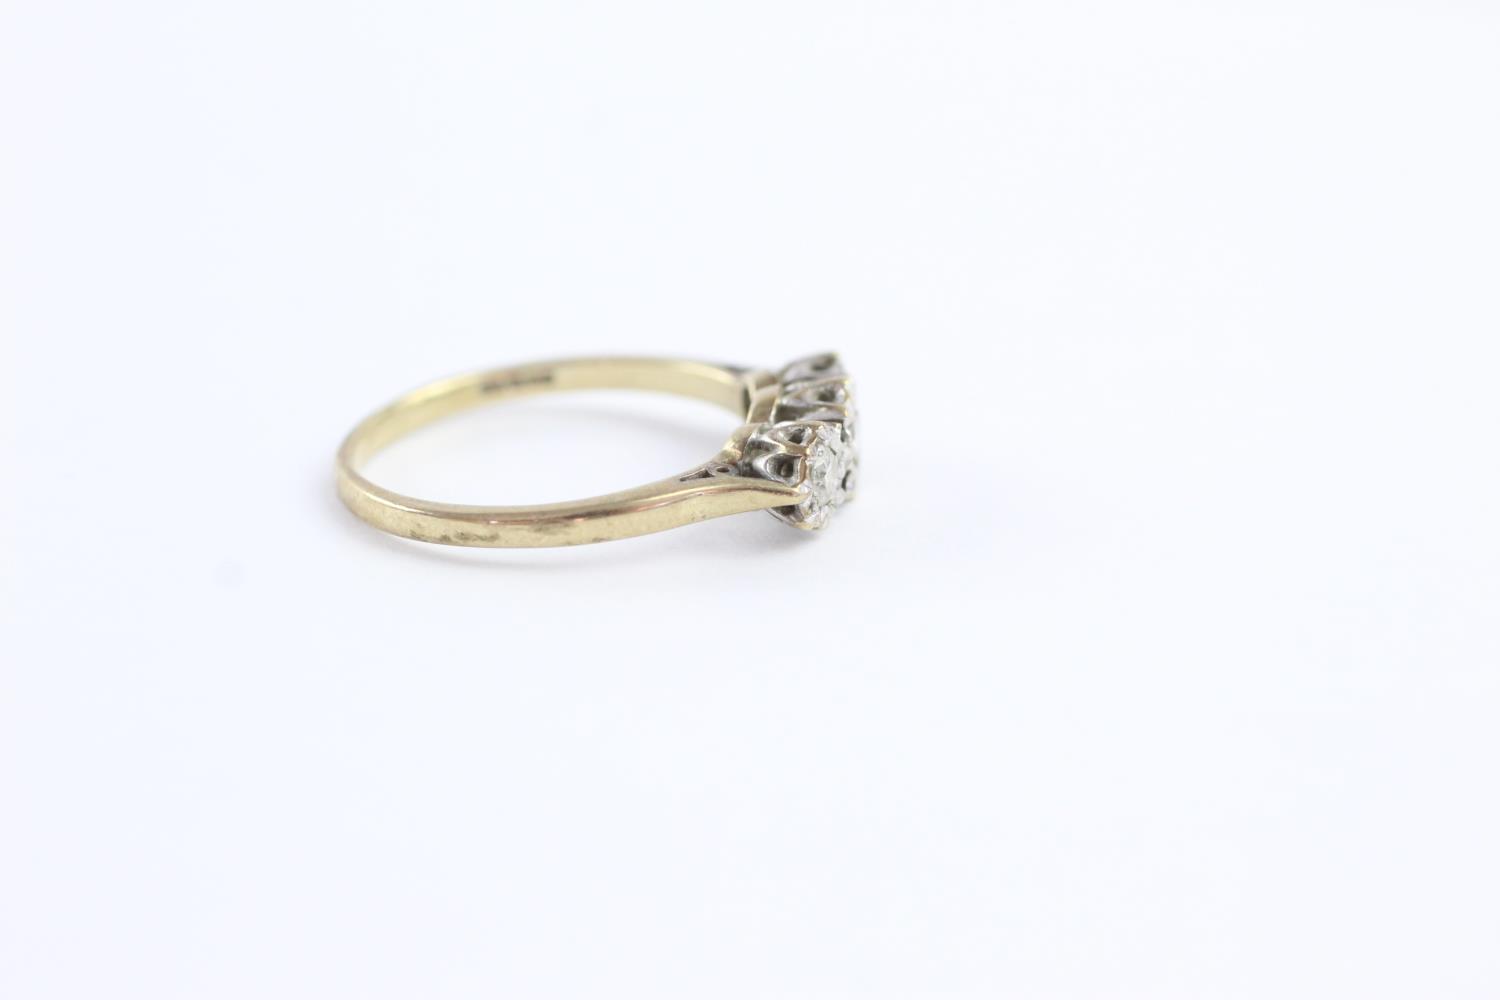 9ct gold diamond trilogy ring (2.6g) size R - Image 7 of 8